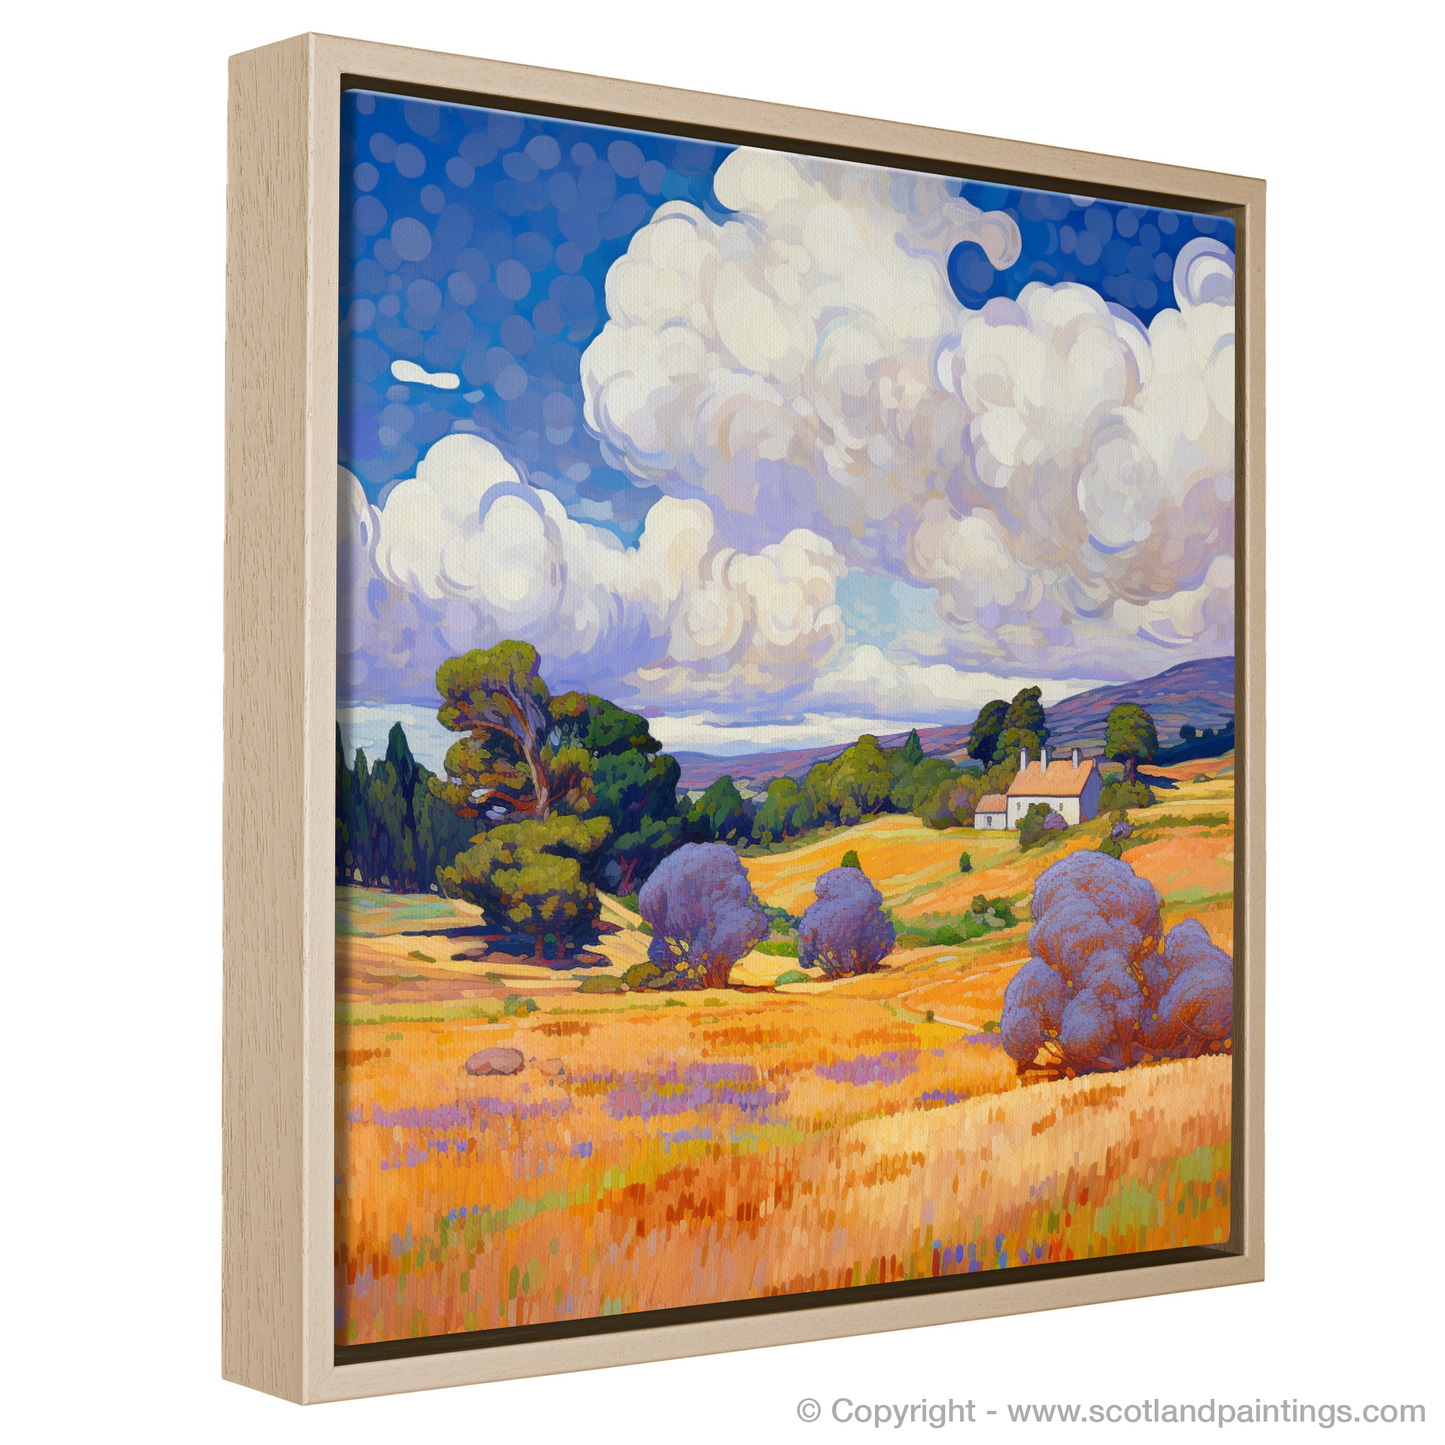 Painting and Art Print of Glenlivet, Moray in summer entitled "Summer Serenade in Glenlivet Moray".